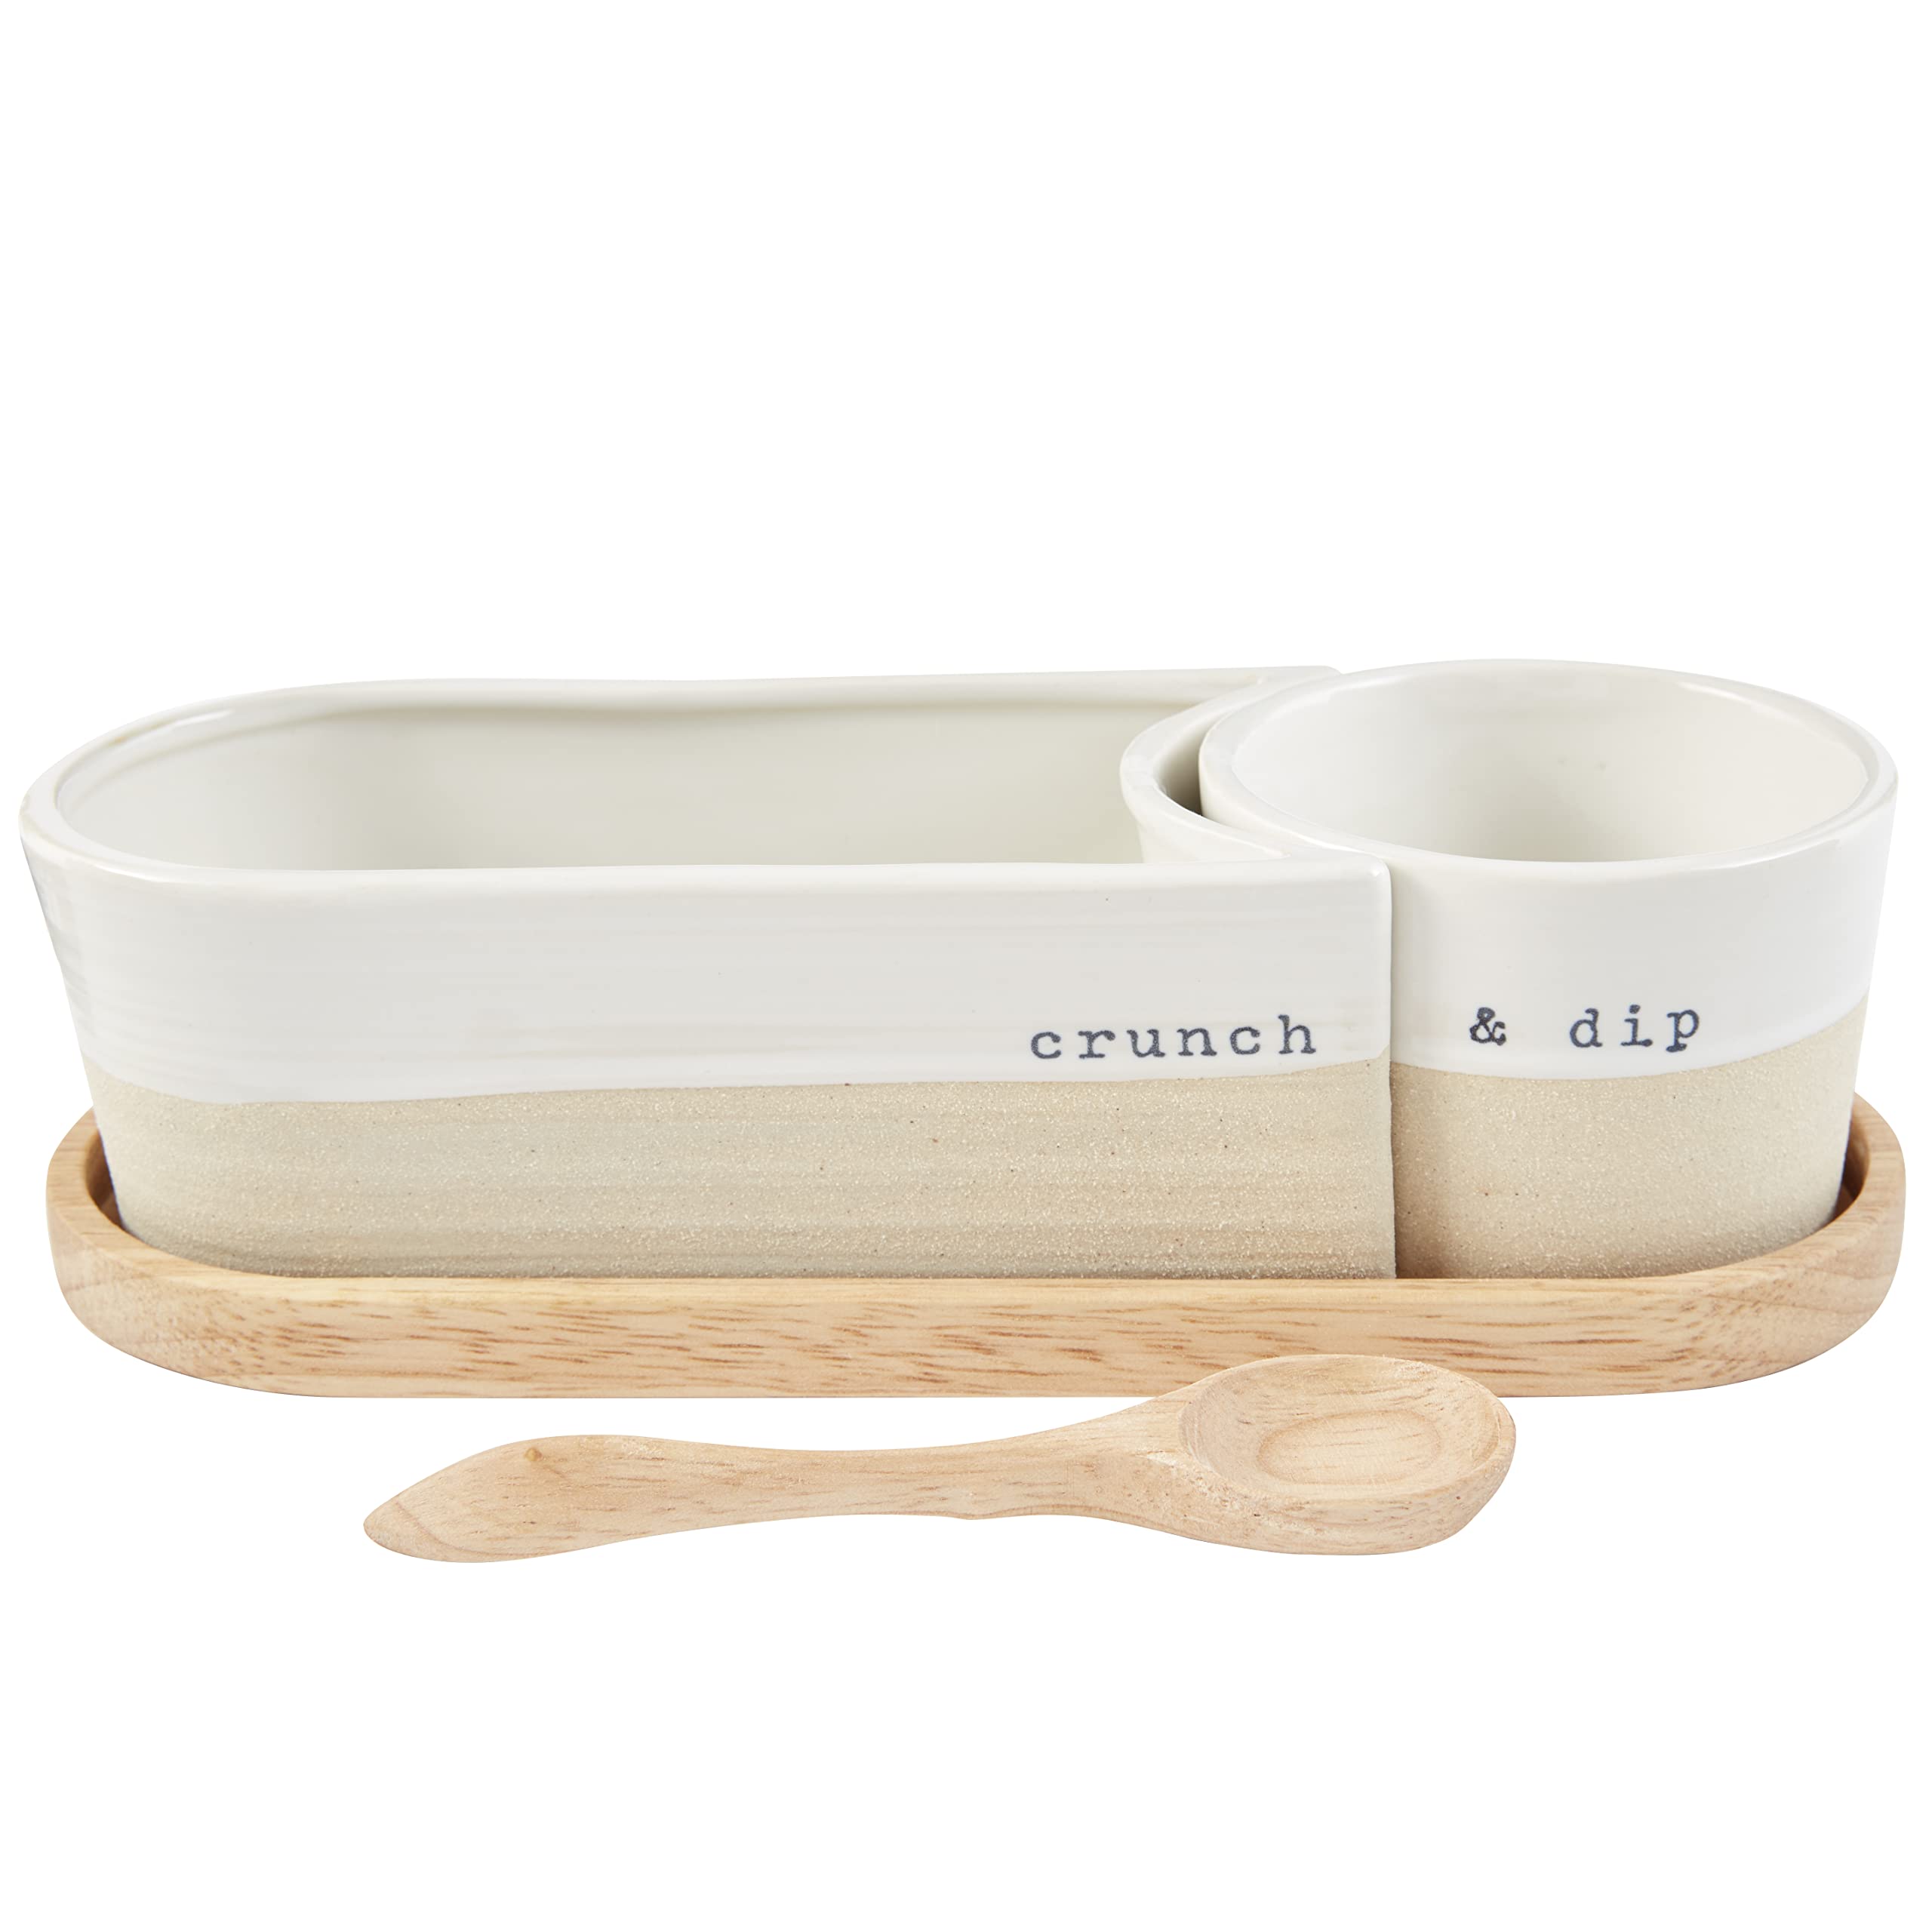 Mud Pie Farm Sectioned Server Set; Assembled 4" X 9 1/2" | Spoon 5", Cream